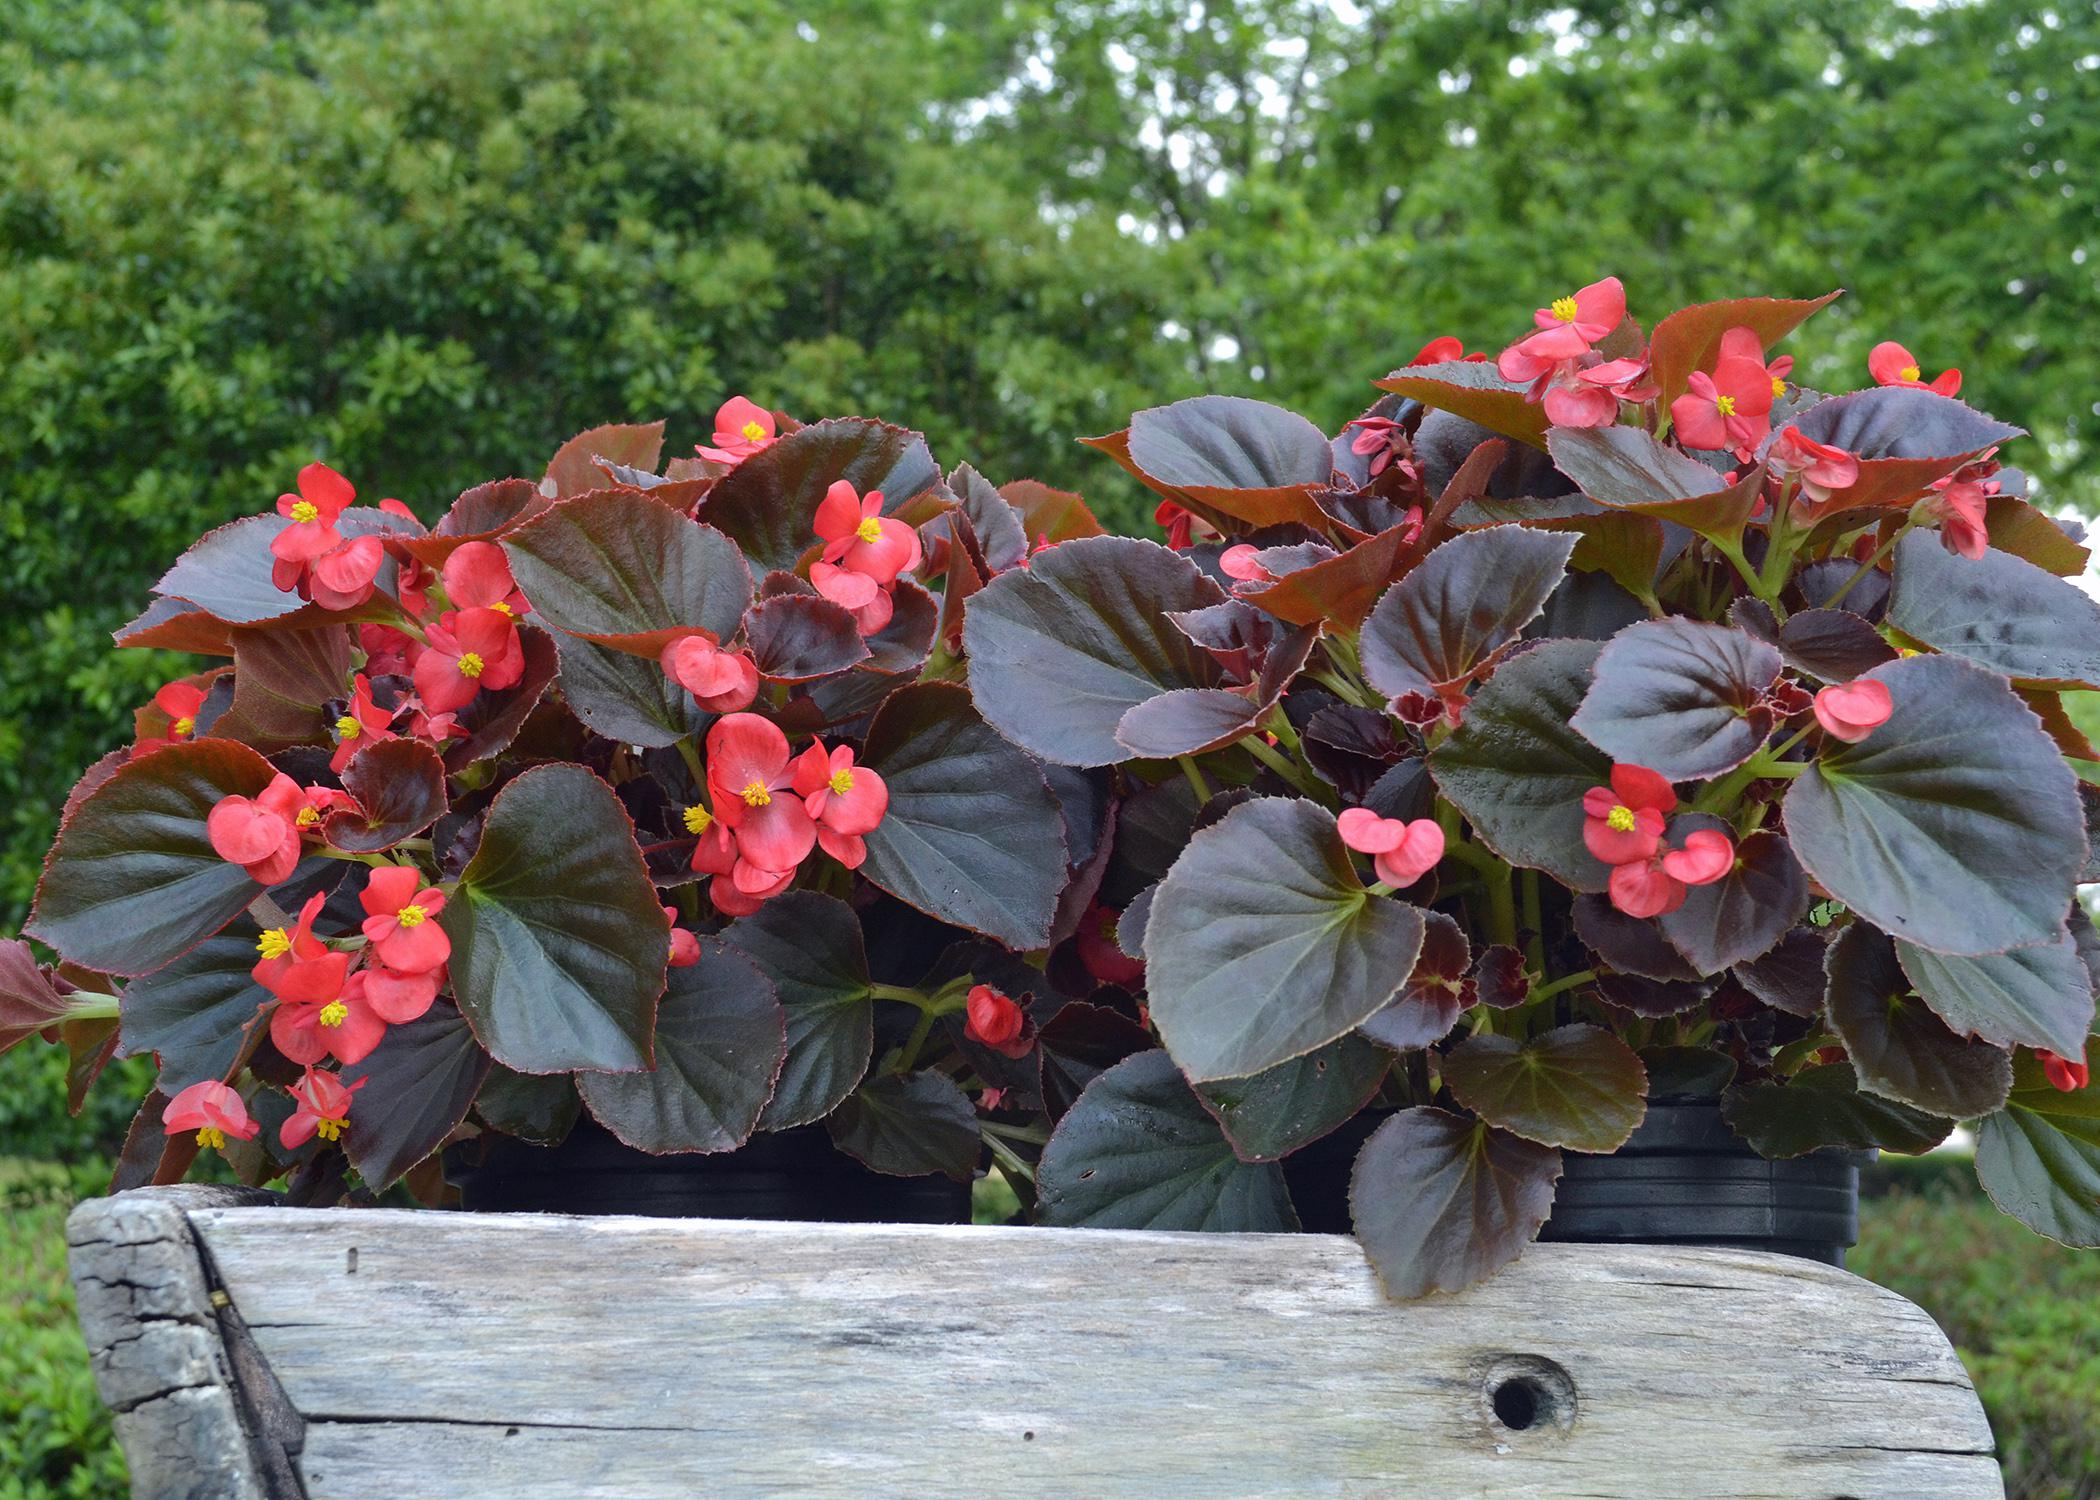 Plants with purple leaves and red flowers are in a wooden tray.